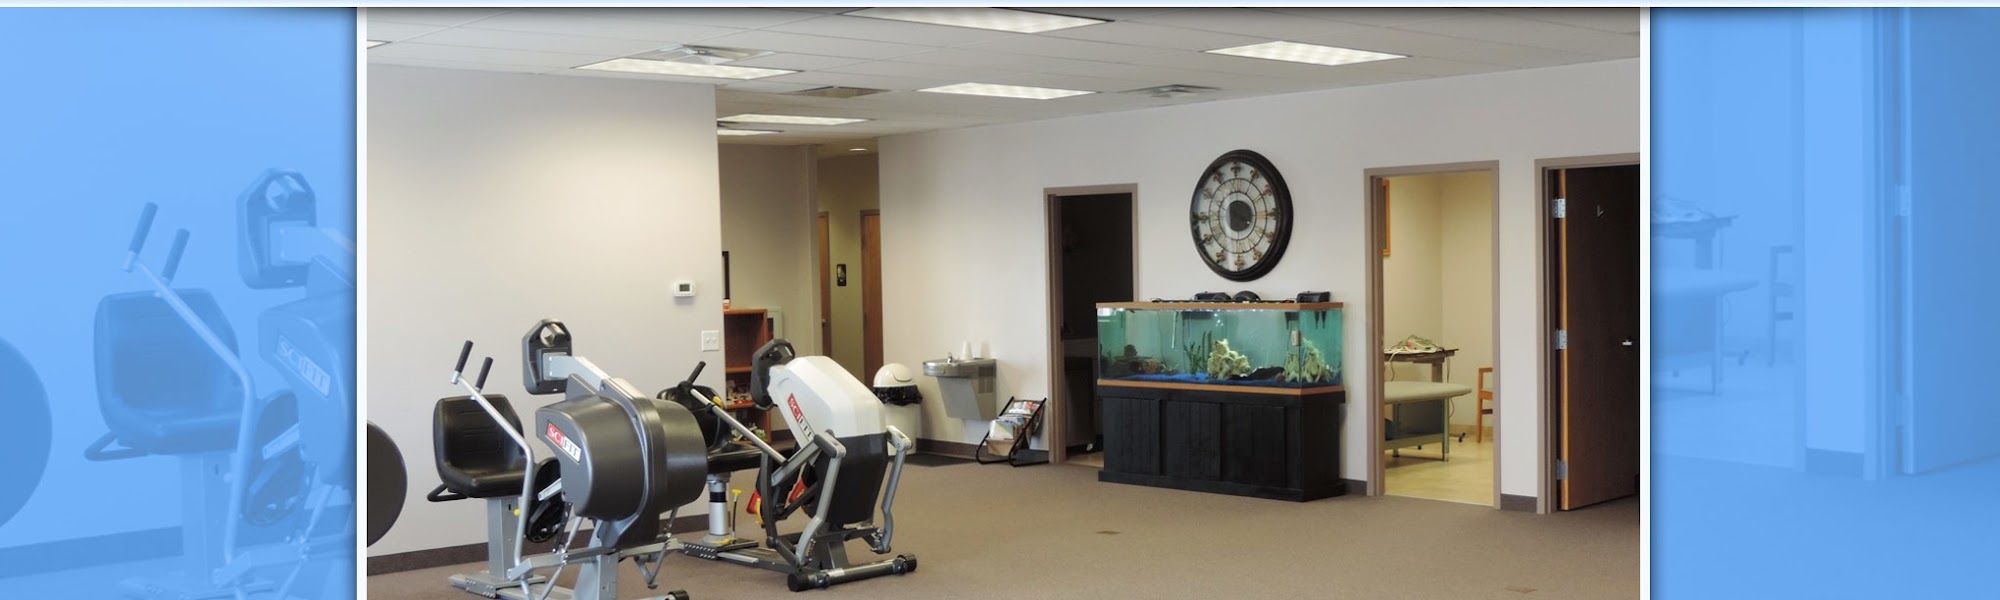 Delta Physical Therapy and Sports Medicine 95 White Sage Ave Ste C, Delta Utah 84624